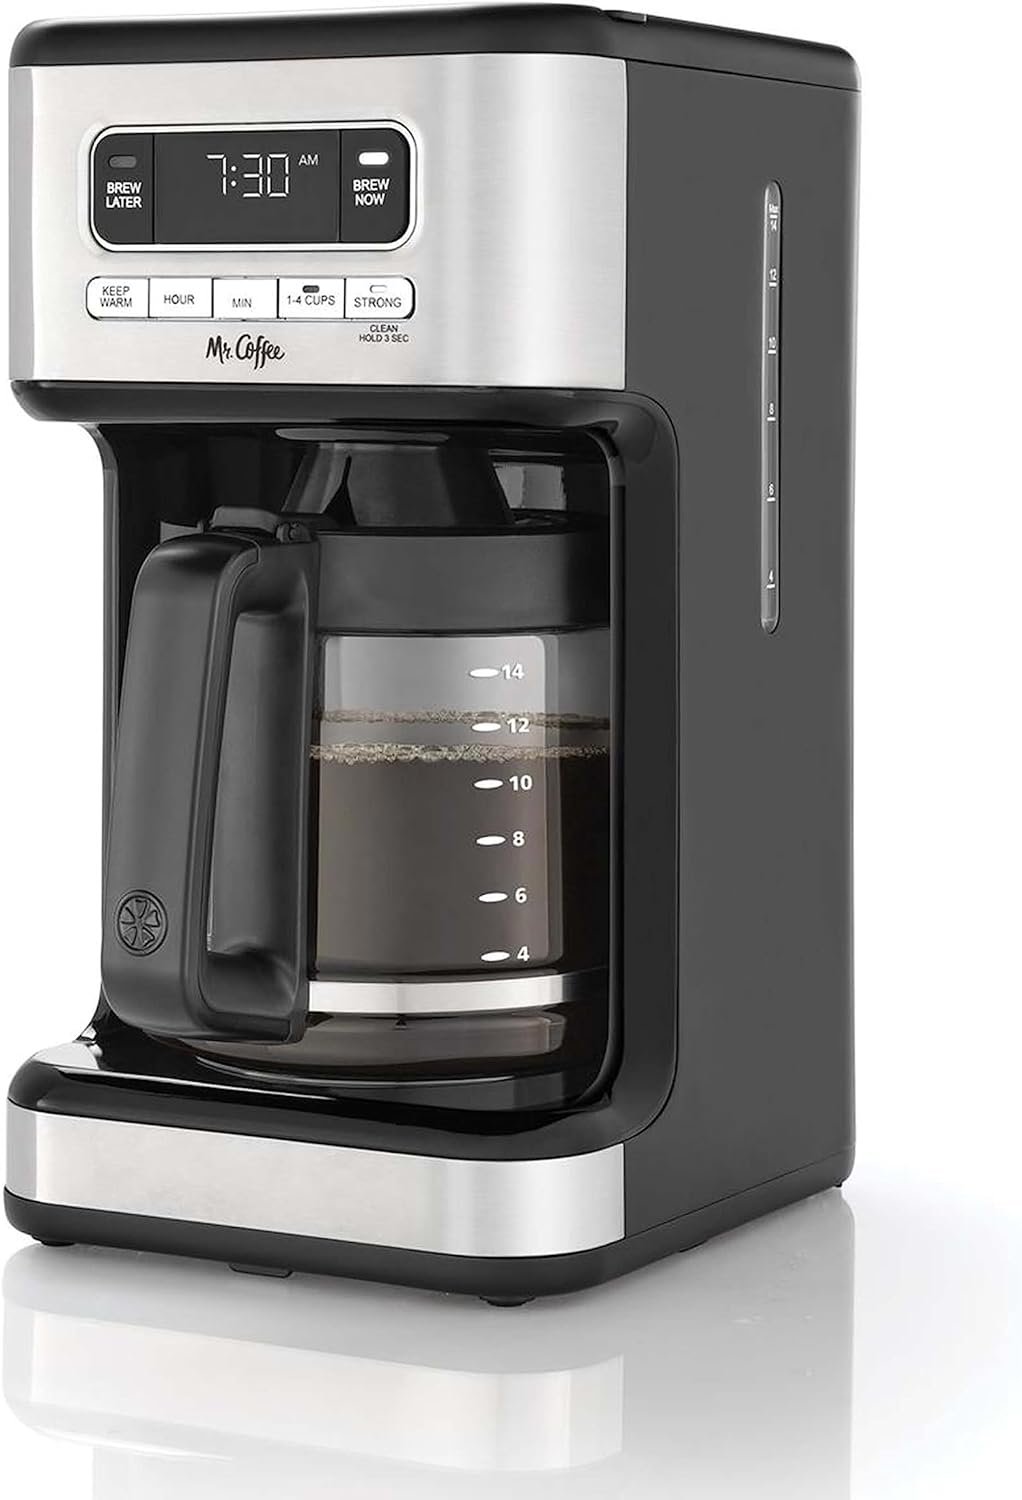 Best Rated Mr. Coffee Maker